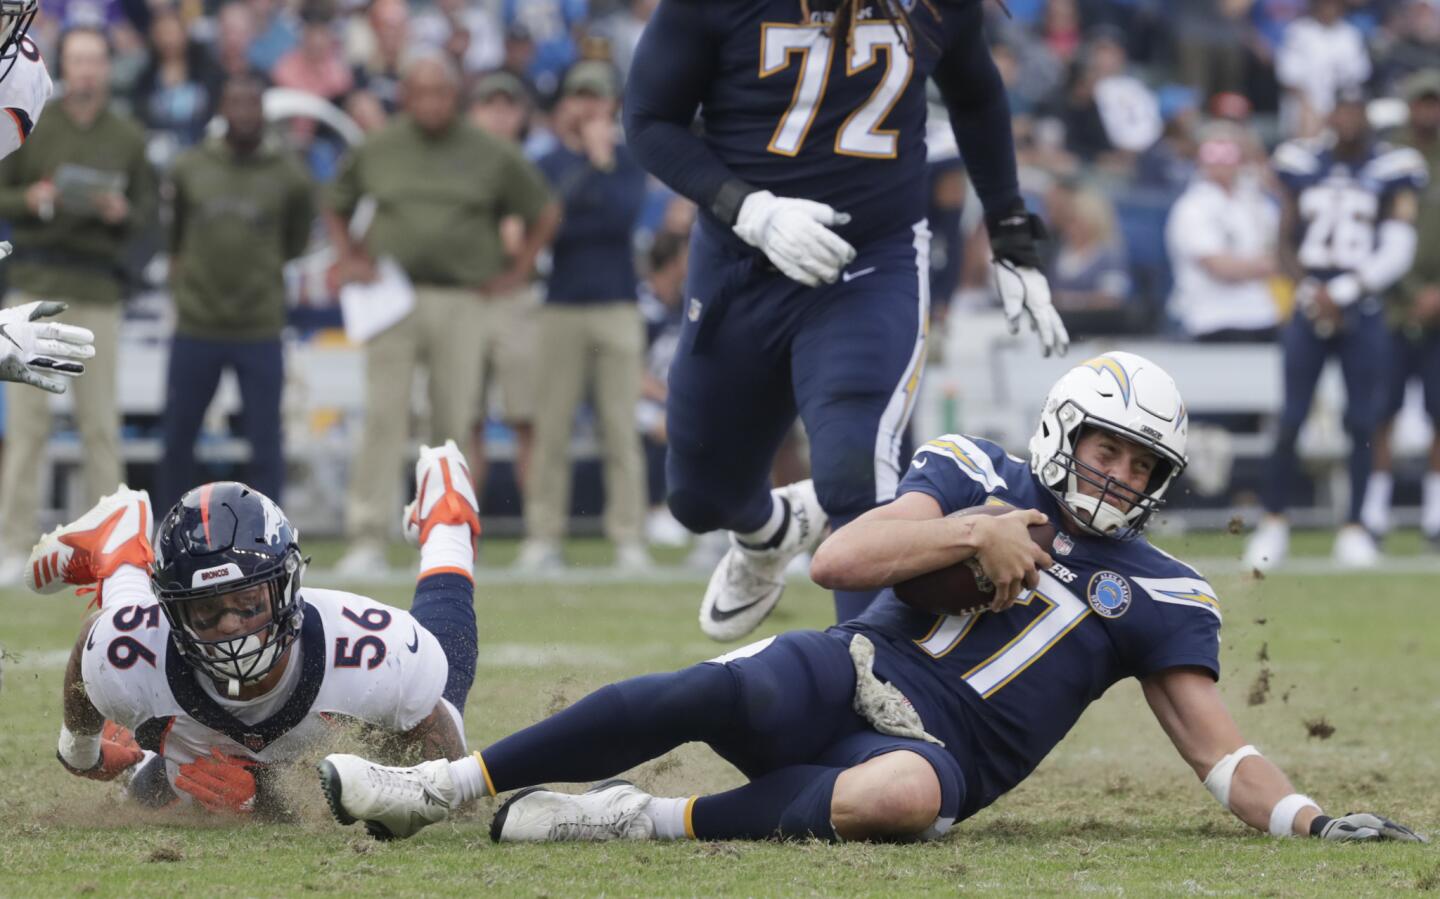 Chargers quarterback Philip Rivers slides to the ground after scrambling away from Denver Broncos linebacker Shane Ray during second half action at Stubhub Center.